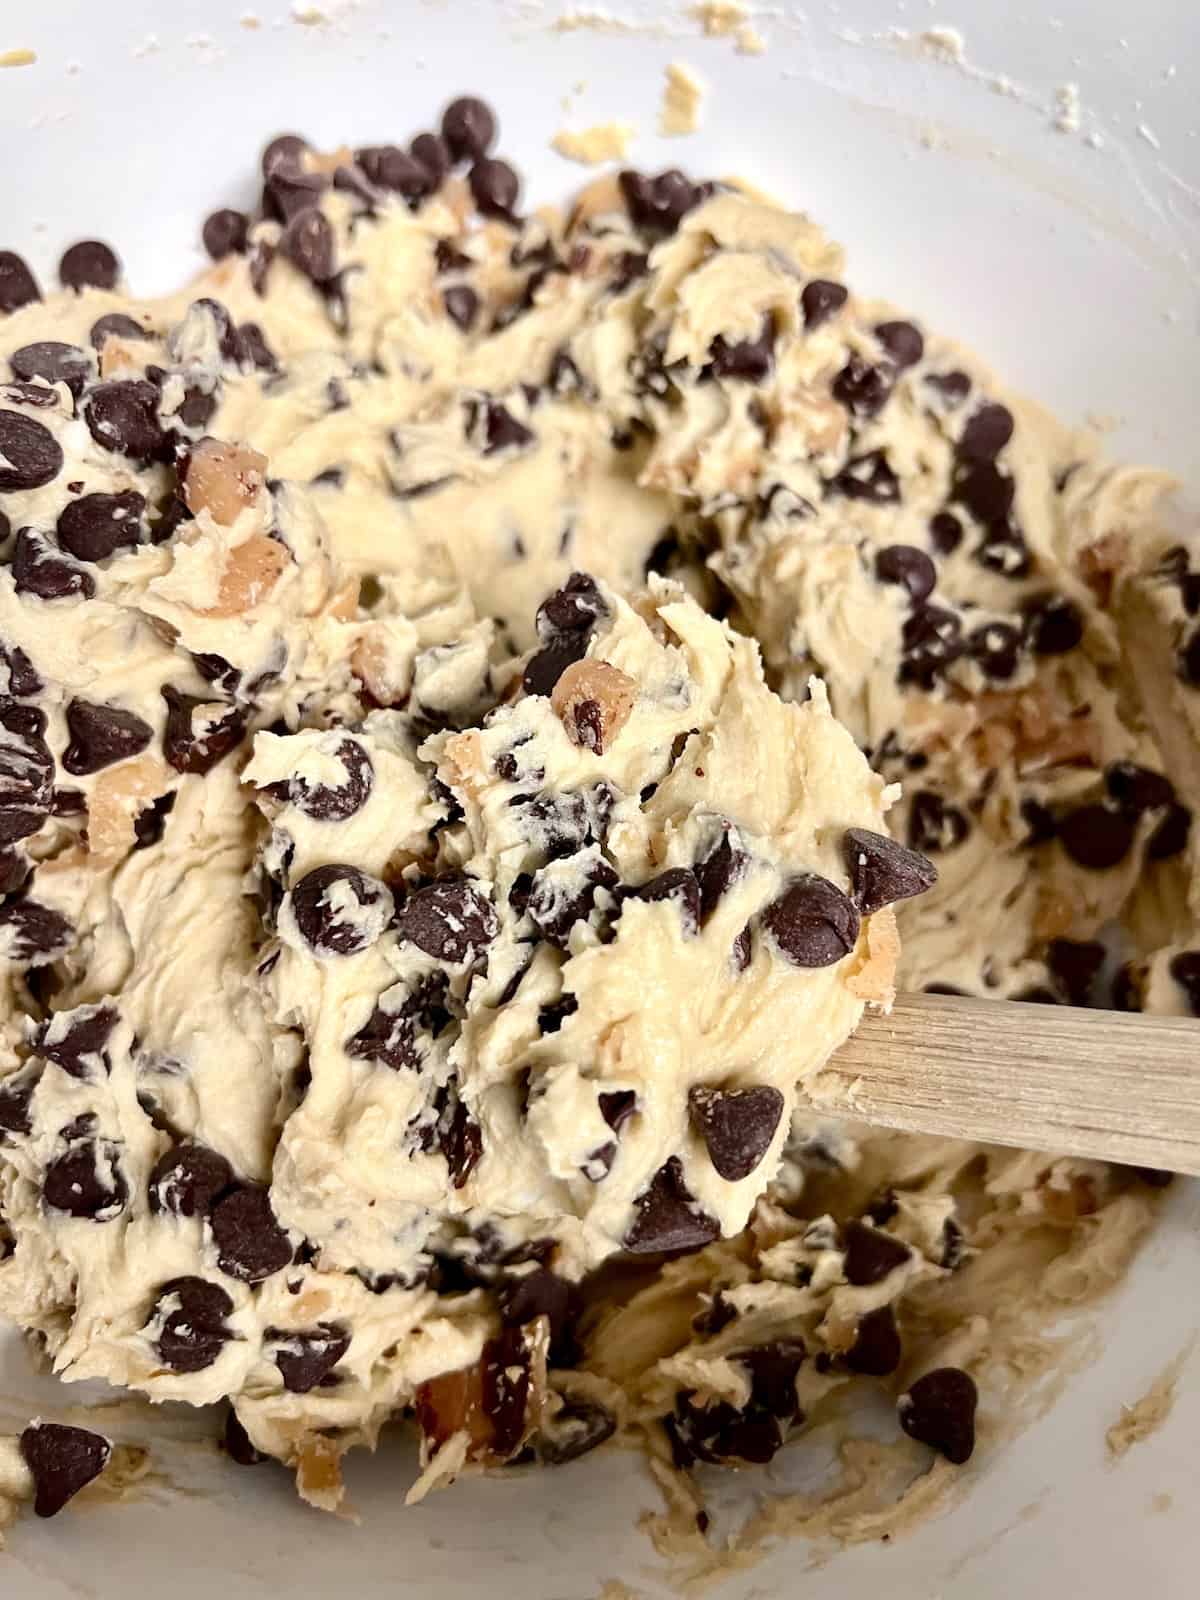 Sea Salt Toffee Chocolate Chip Cookies Folding semisweet chocolate chips and toffee pieces into cookie dough.